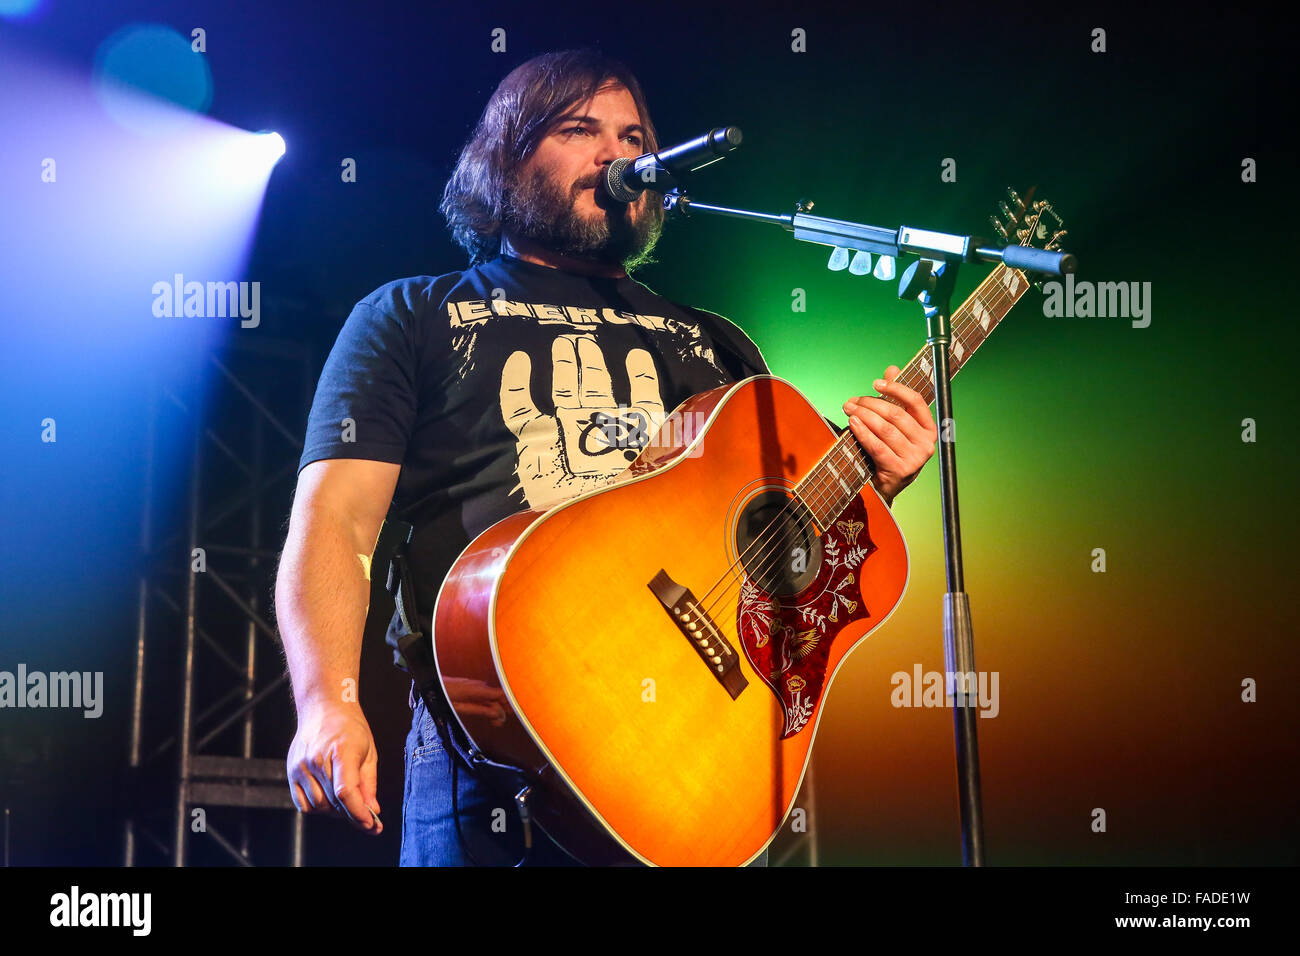 Jack Black and Tenacious D perform in Concert Stock Photo